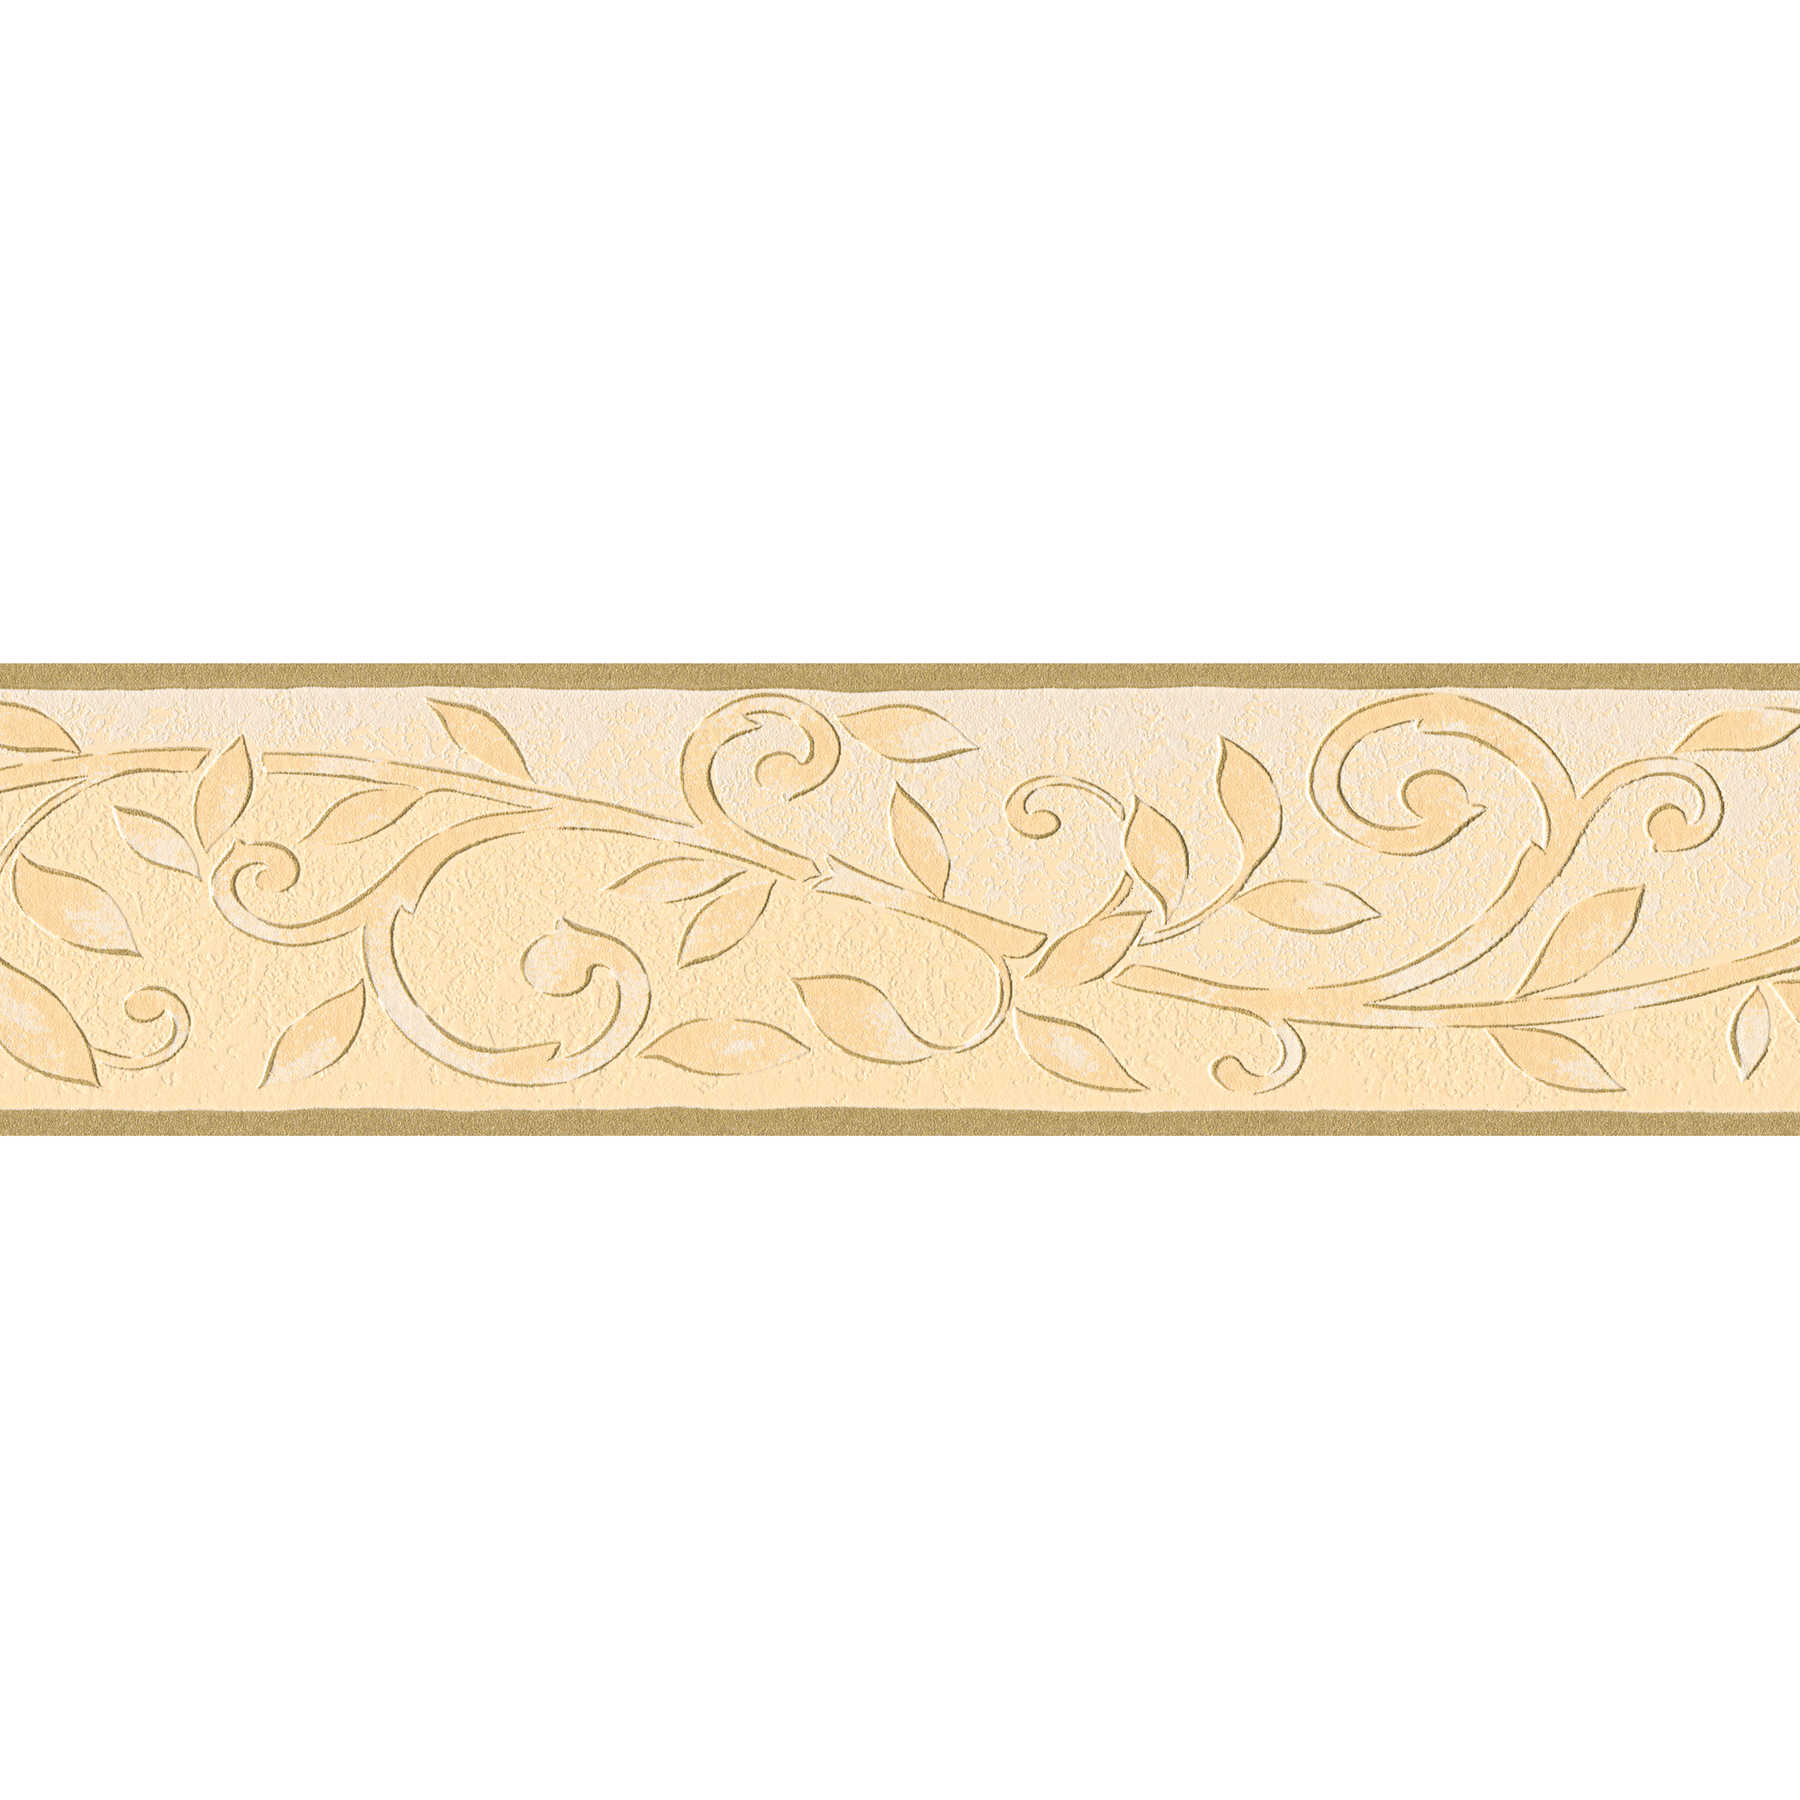         Border with leaf tendrils and gold accents - Beige
    